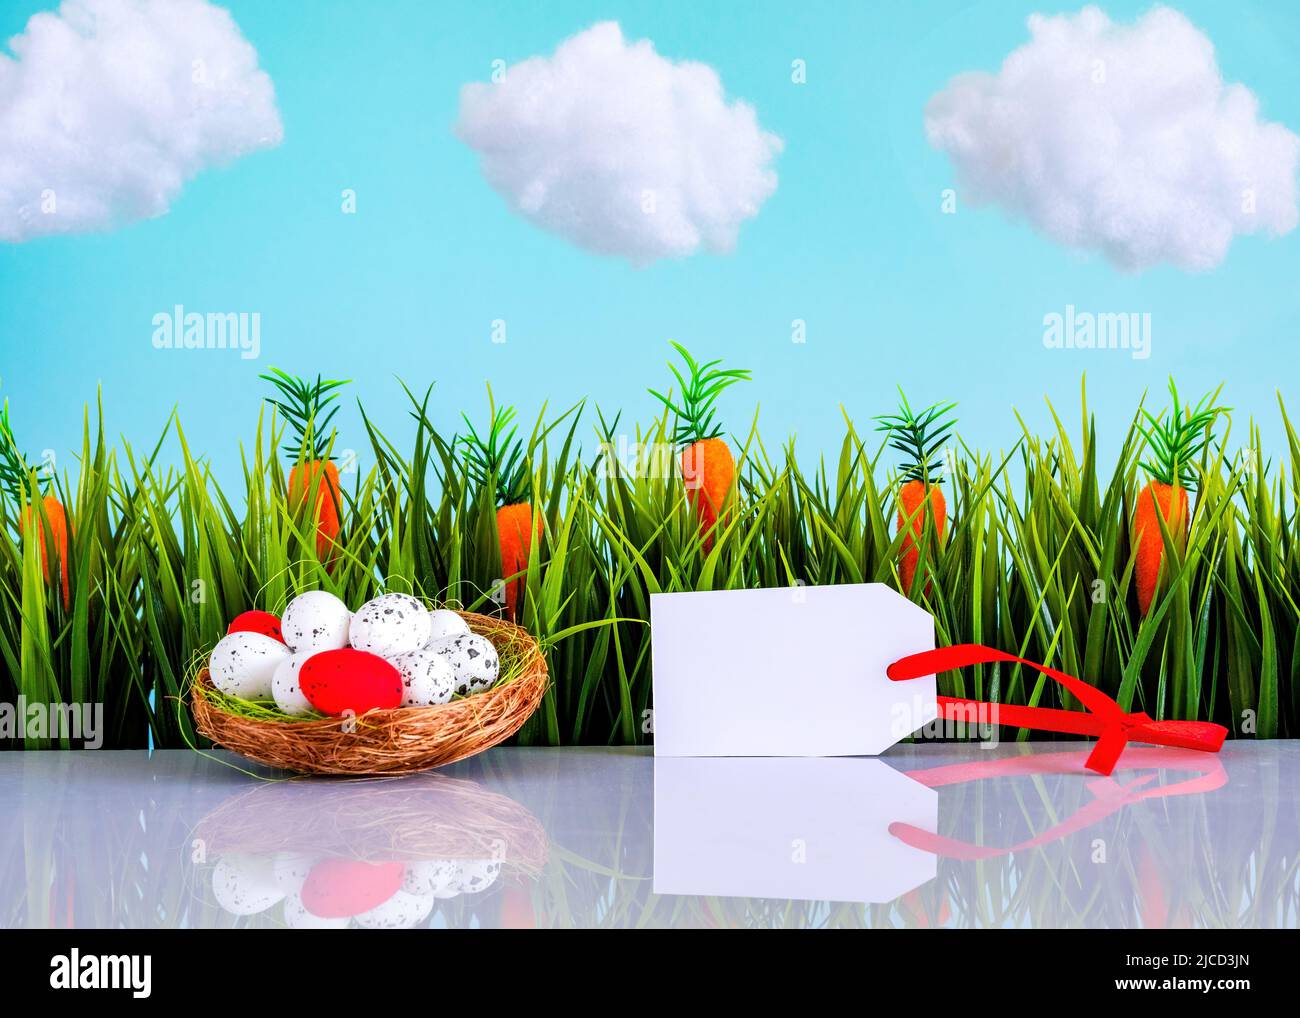 Easter background with colorful eggs, green grass, tag and blue sky with white clouds Stock Photo